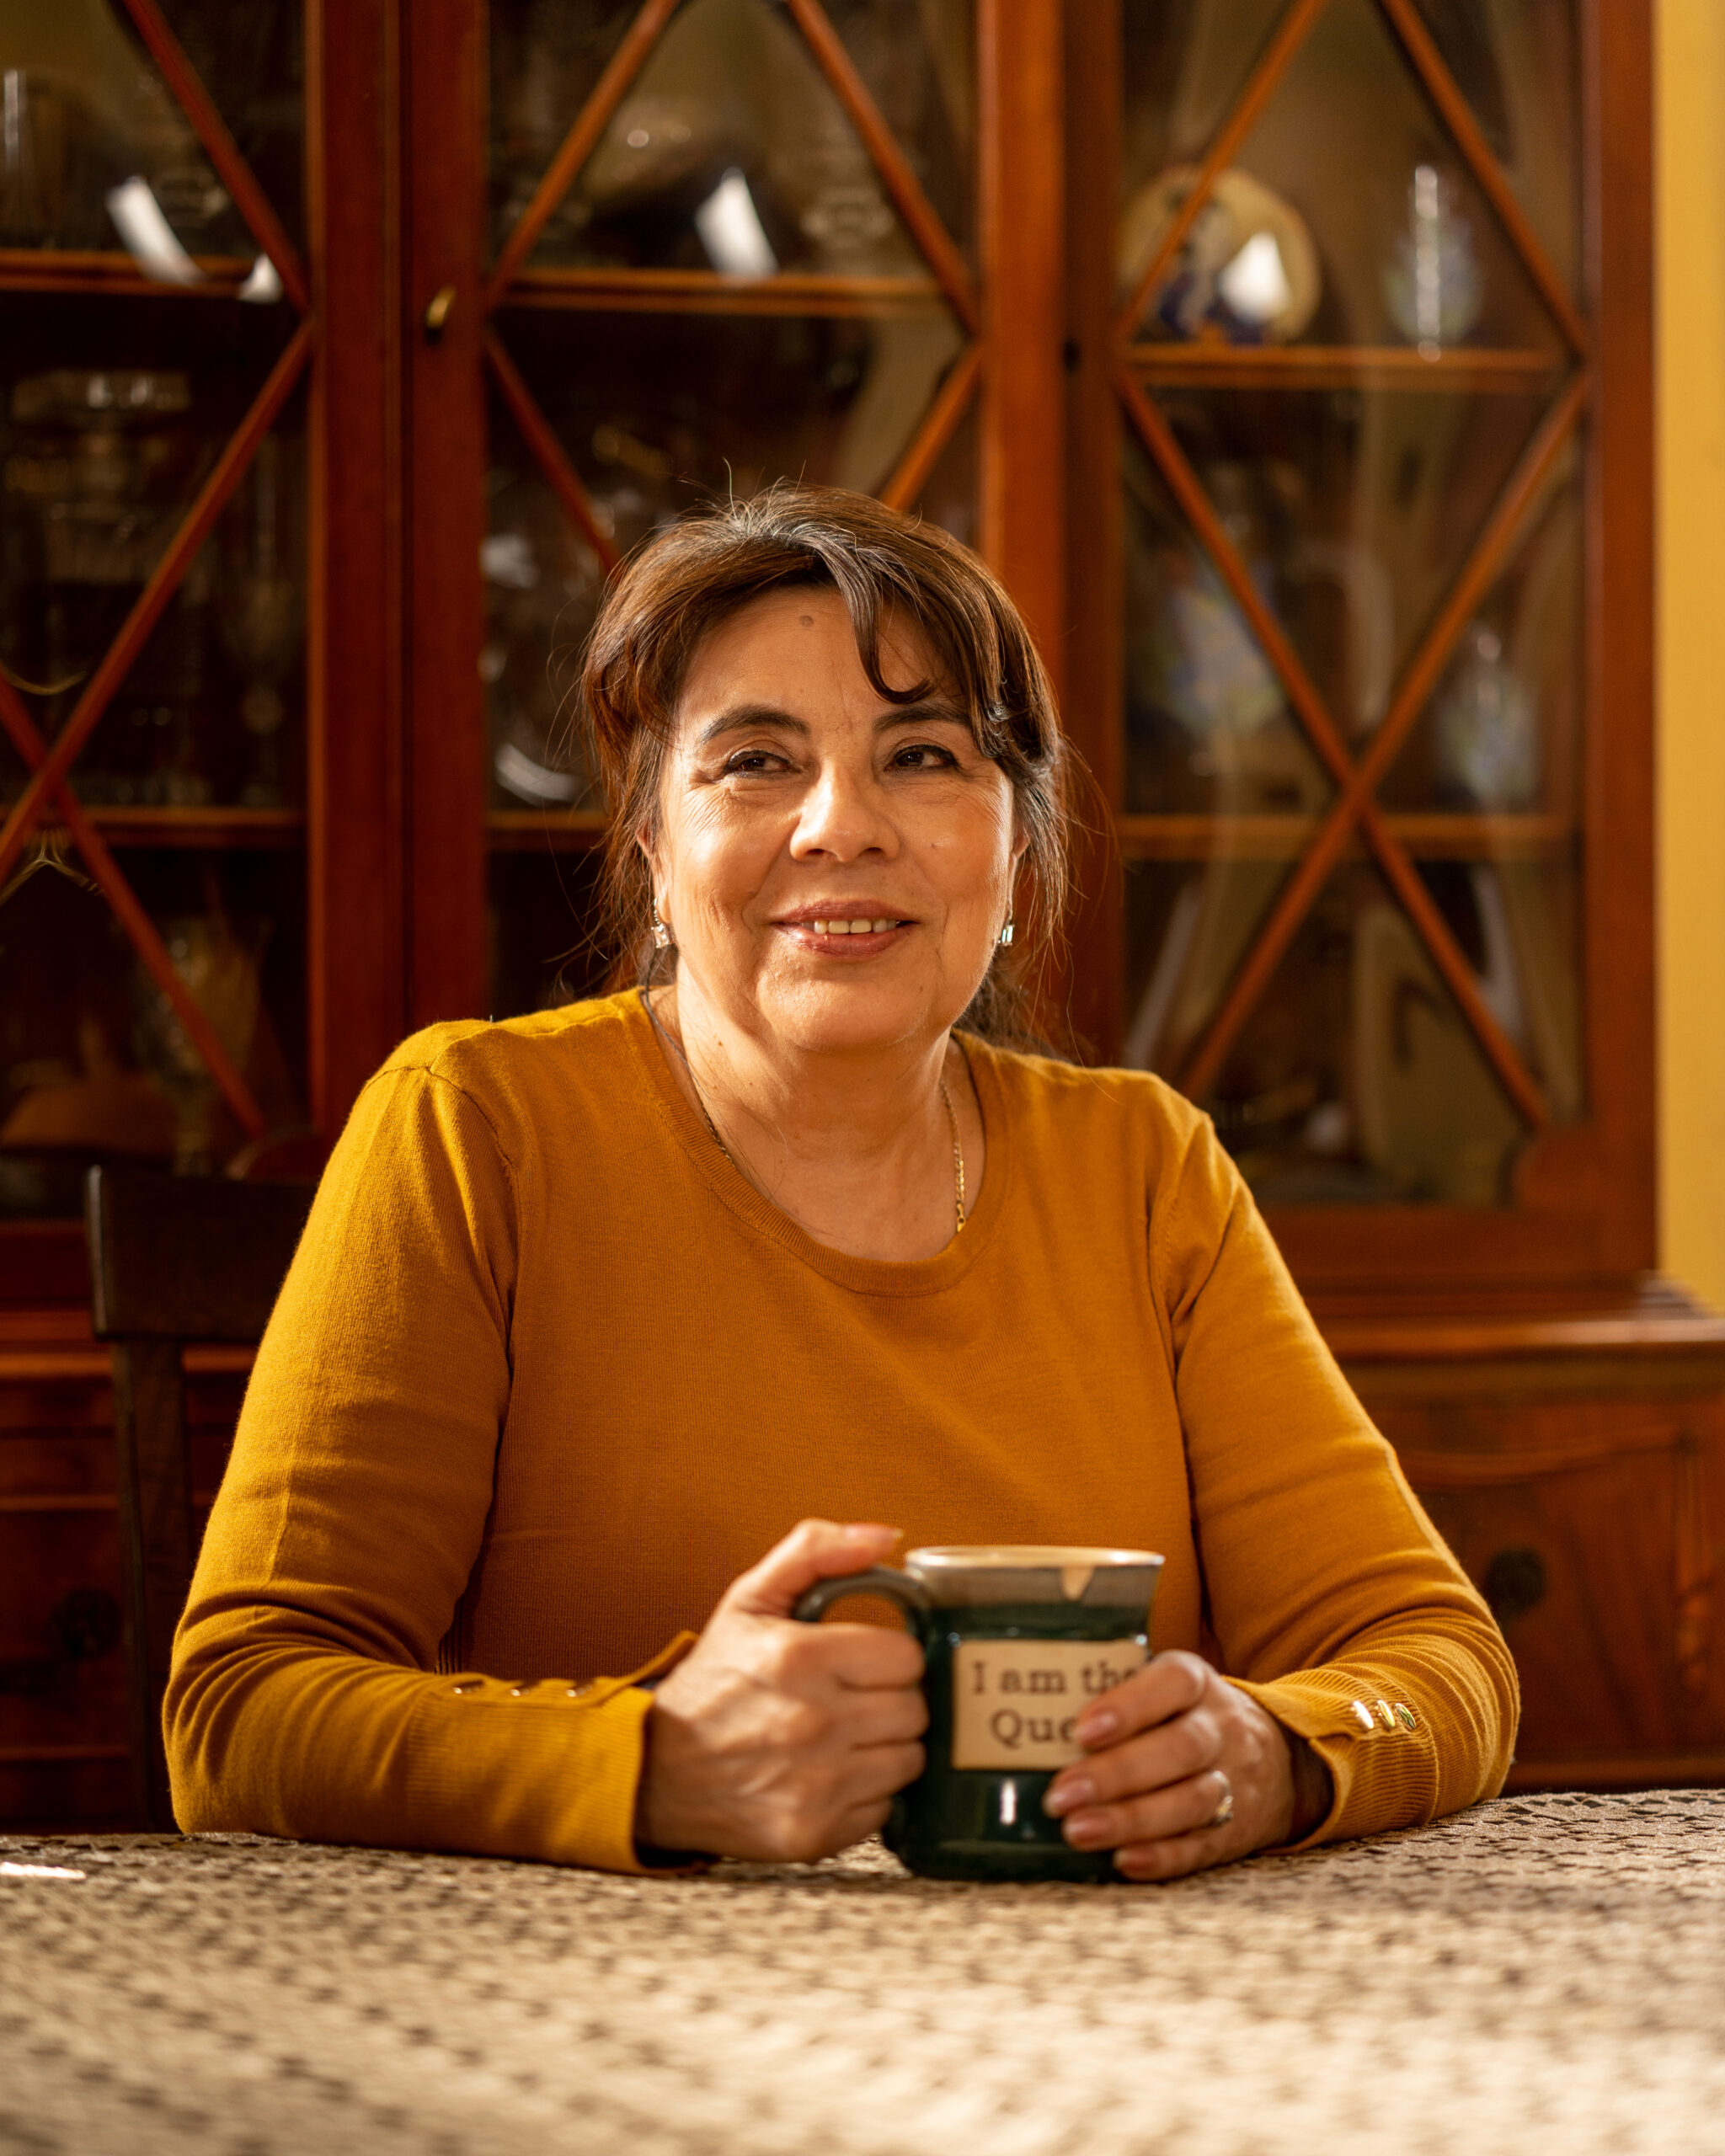 A Latina woman in a yellow sweater holds a coffee mug and sits at a table